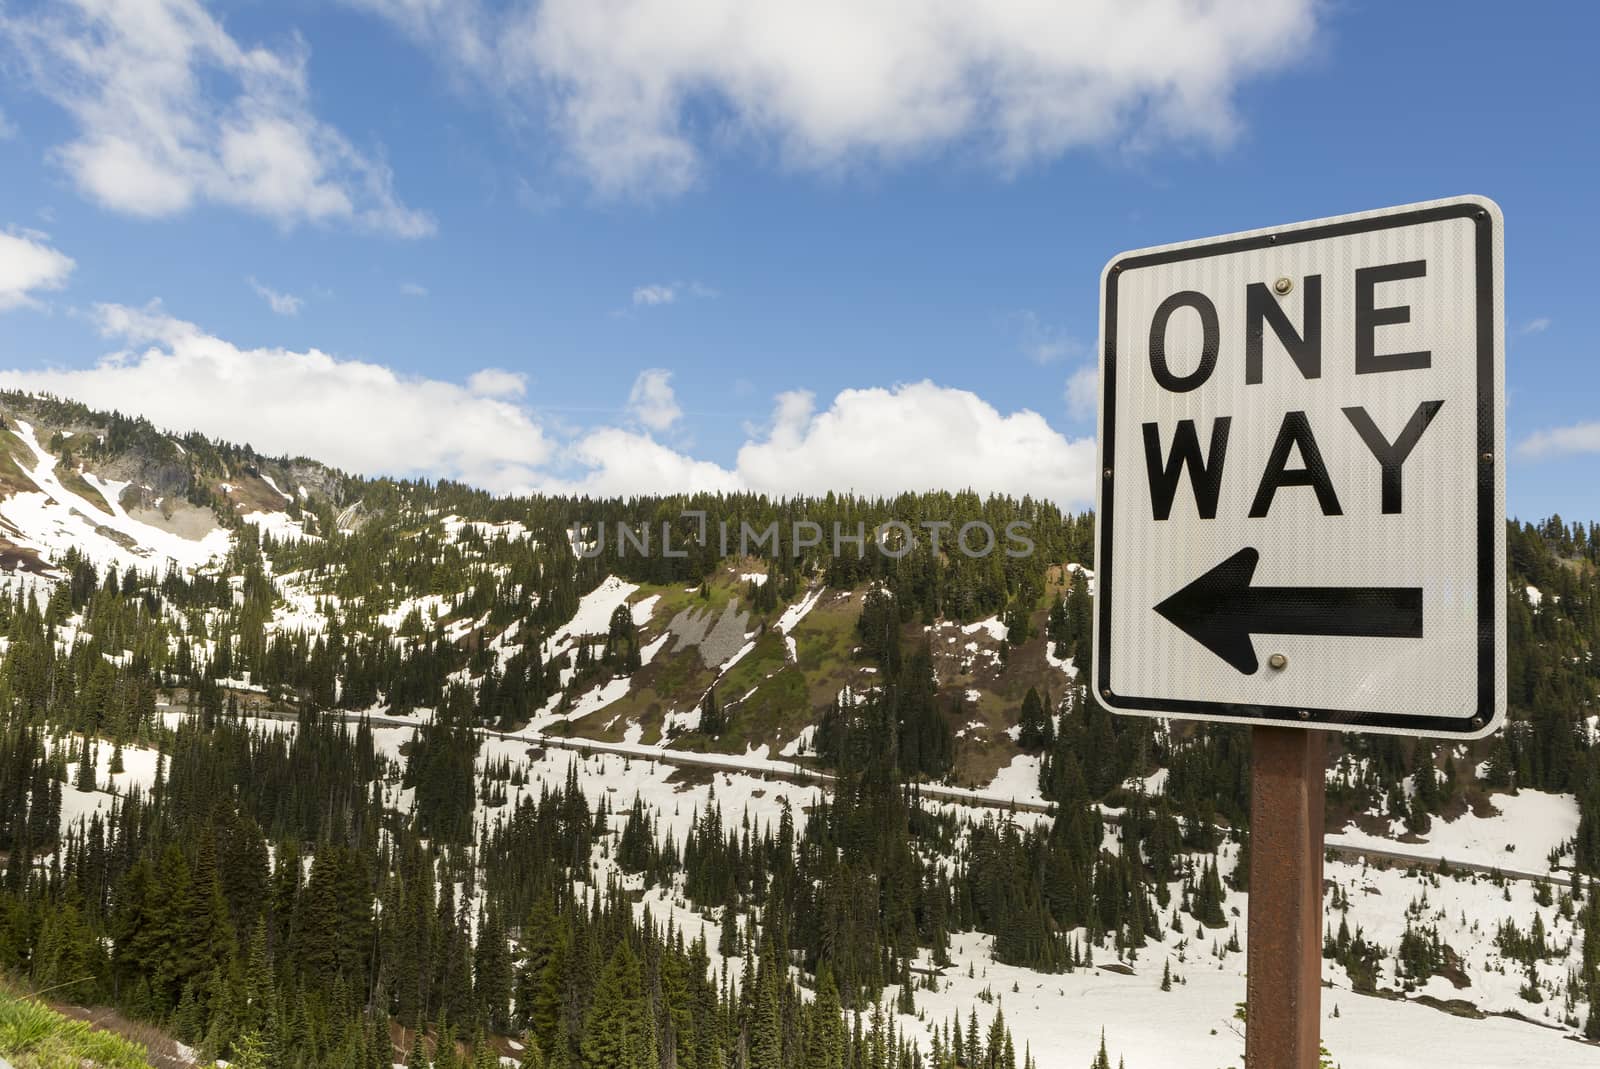 One Way drive along highway in scenic Mount Rainier National Park Washington State